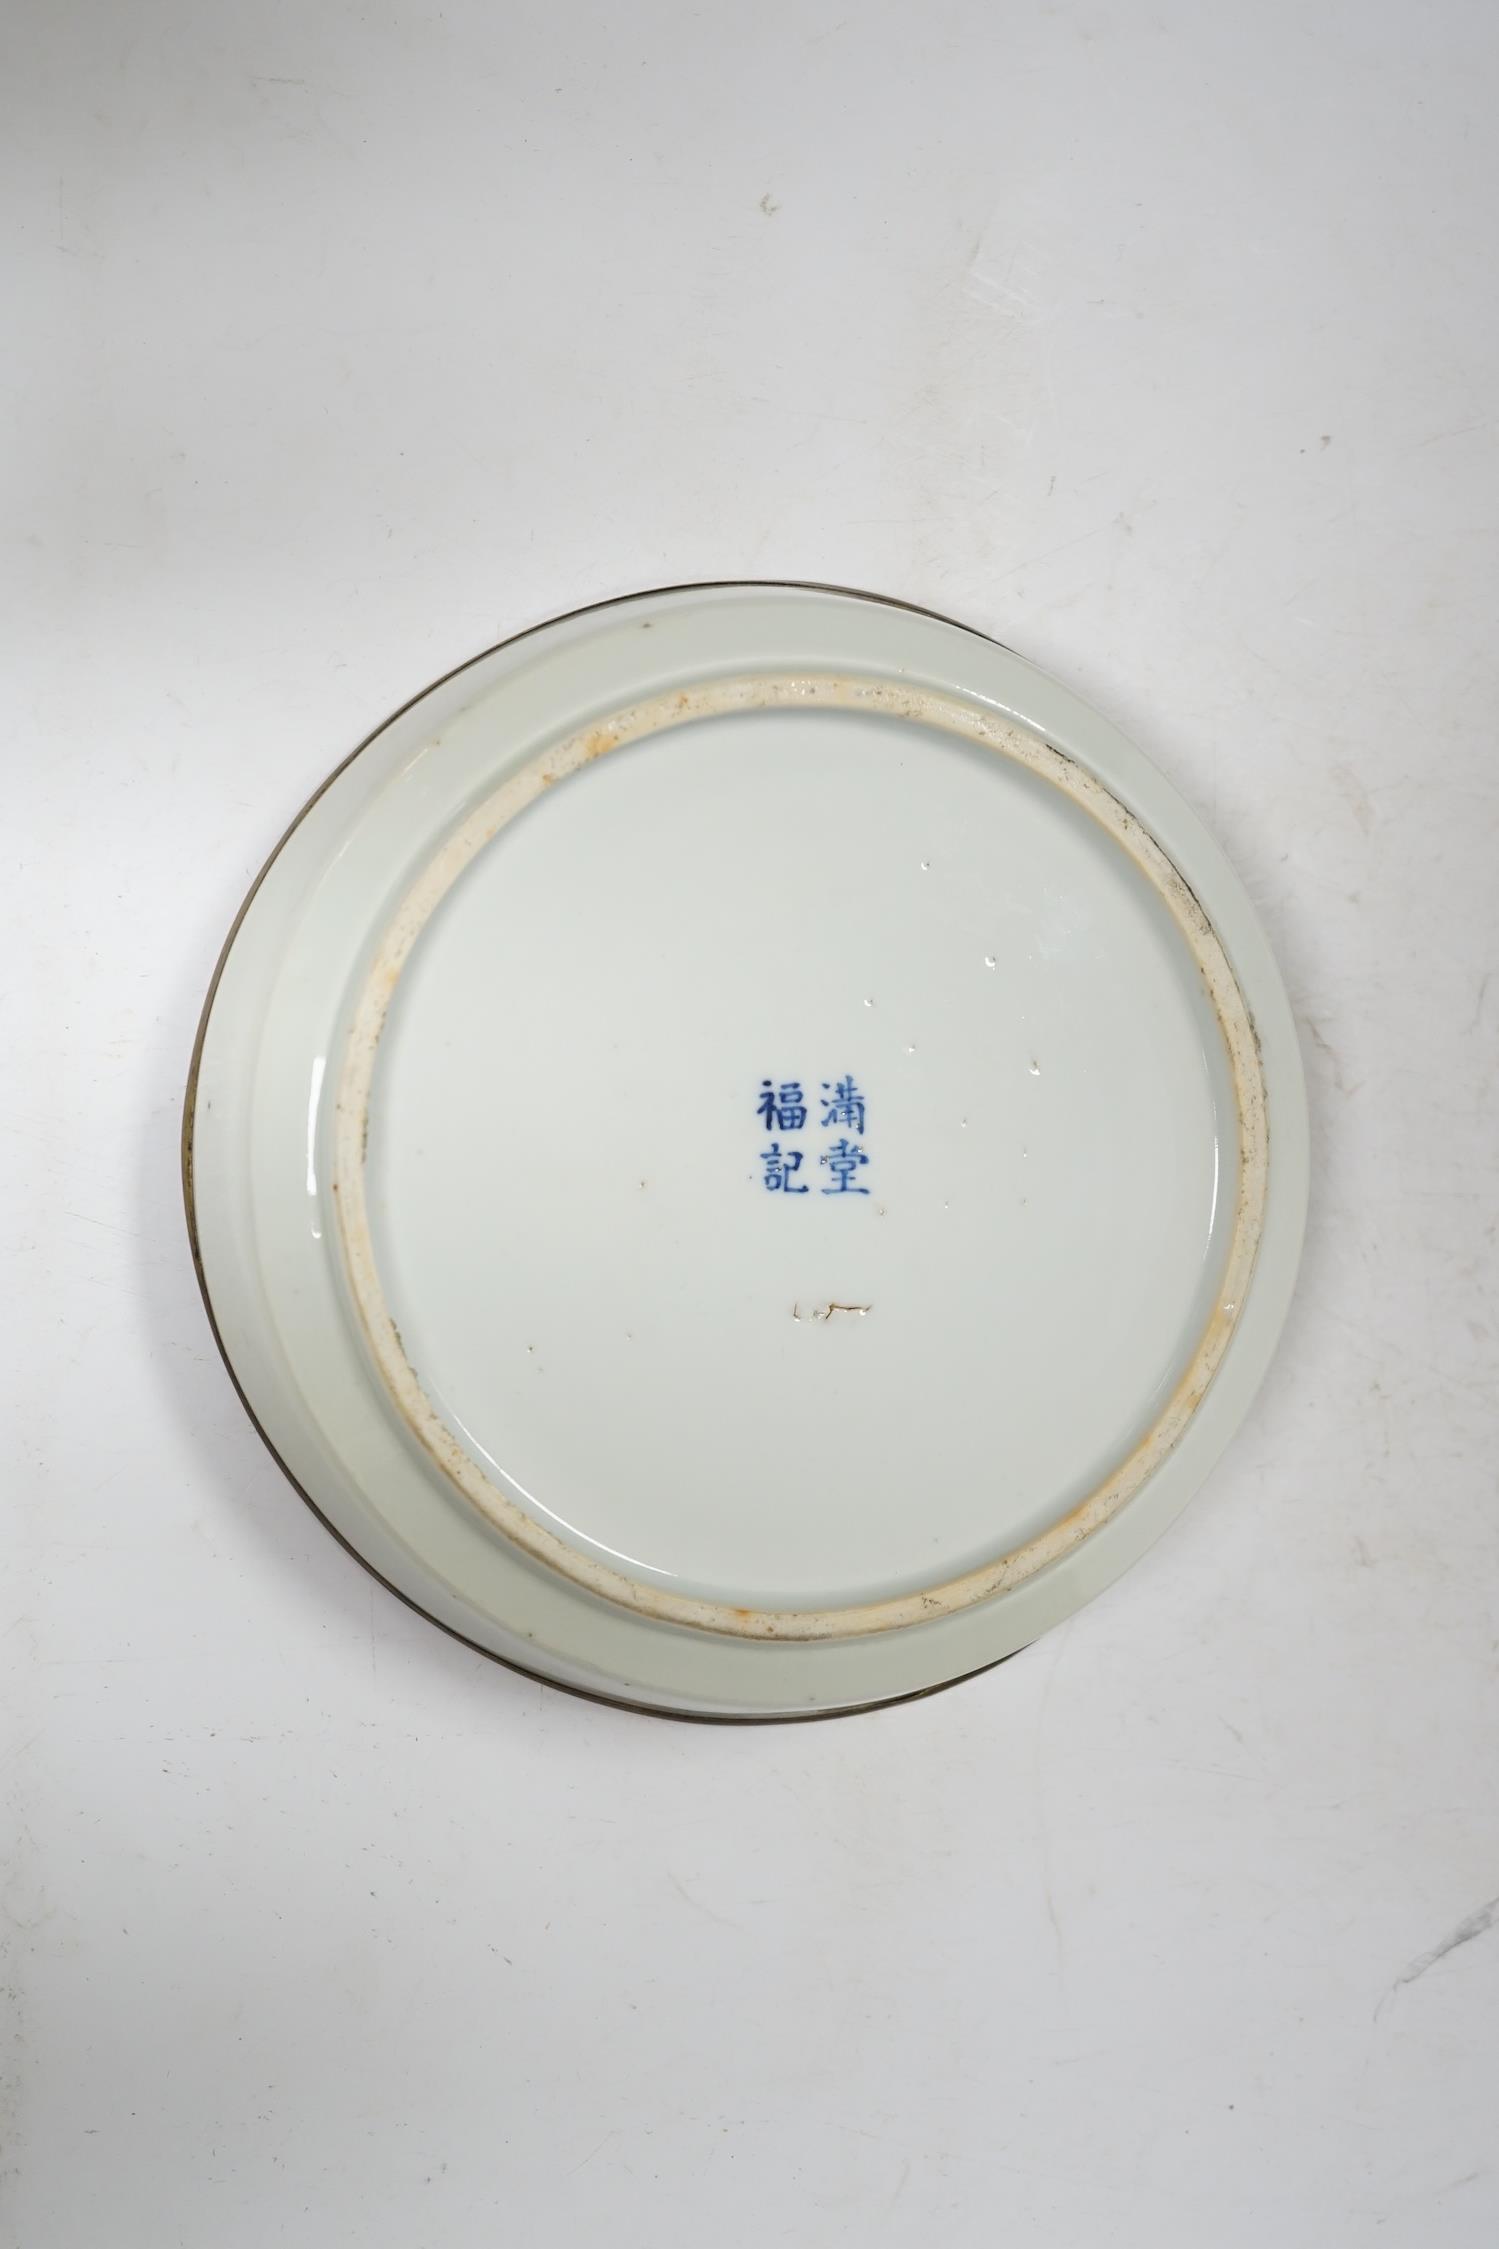 A Chinese blue and white ‘fire dragon’ dish, for the Vietnamese market, with copper bound rim, 19th century, four character mark. Condition - some minor glazing faults